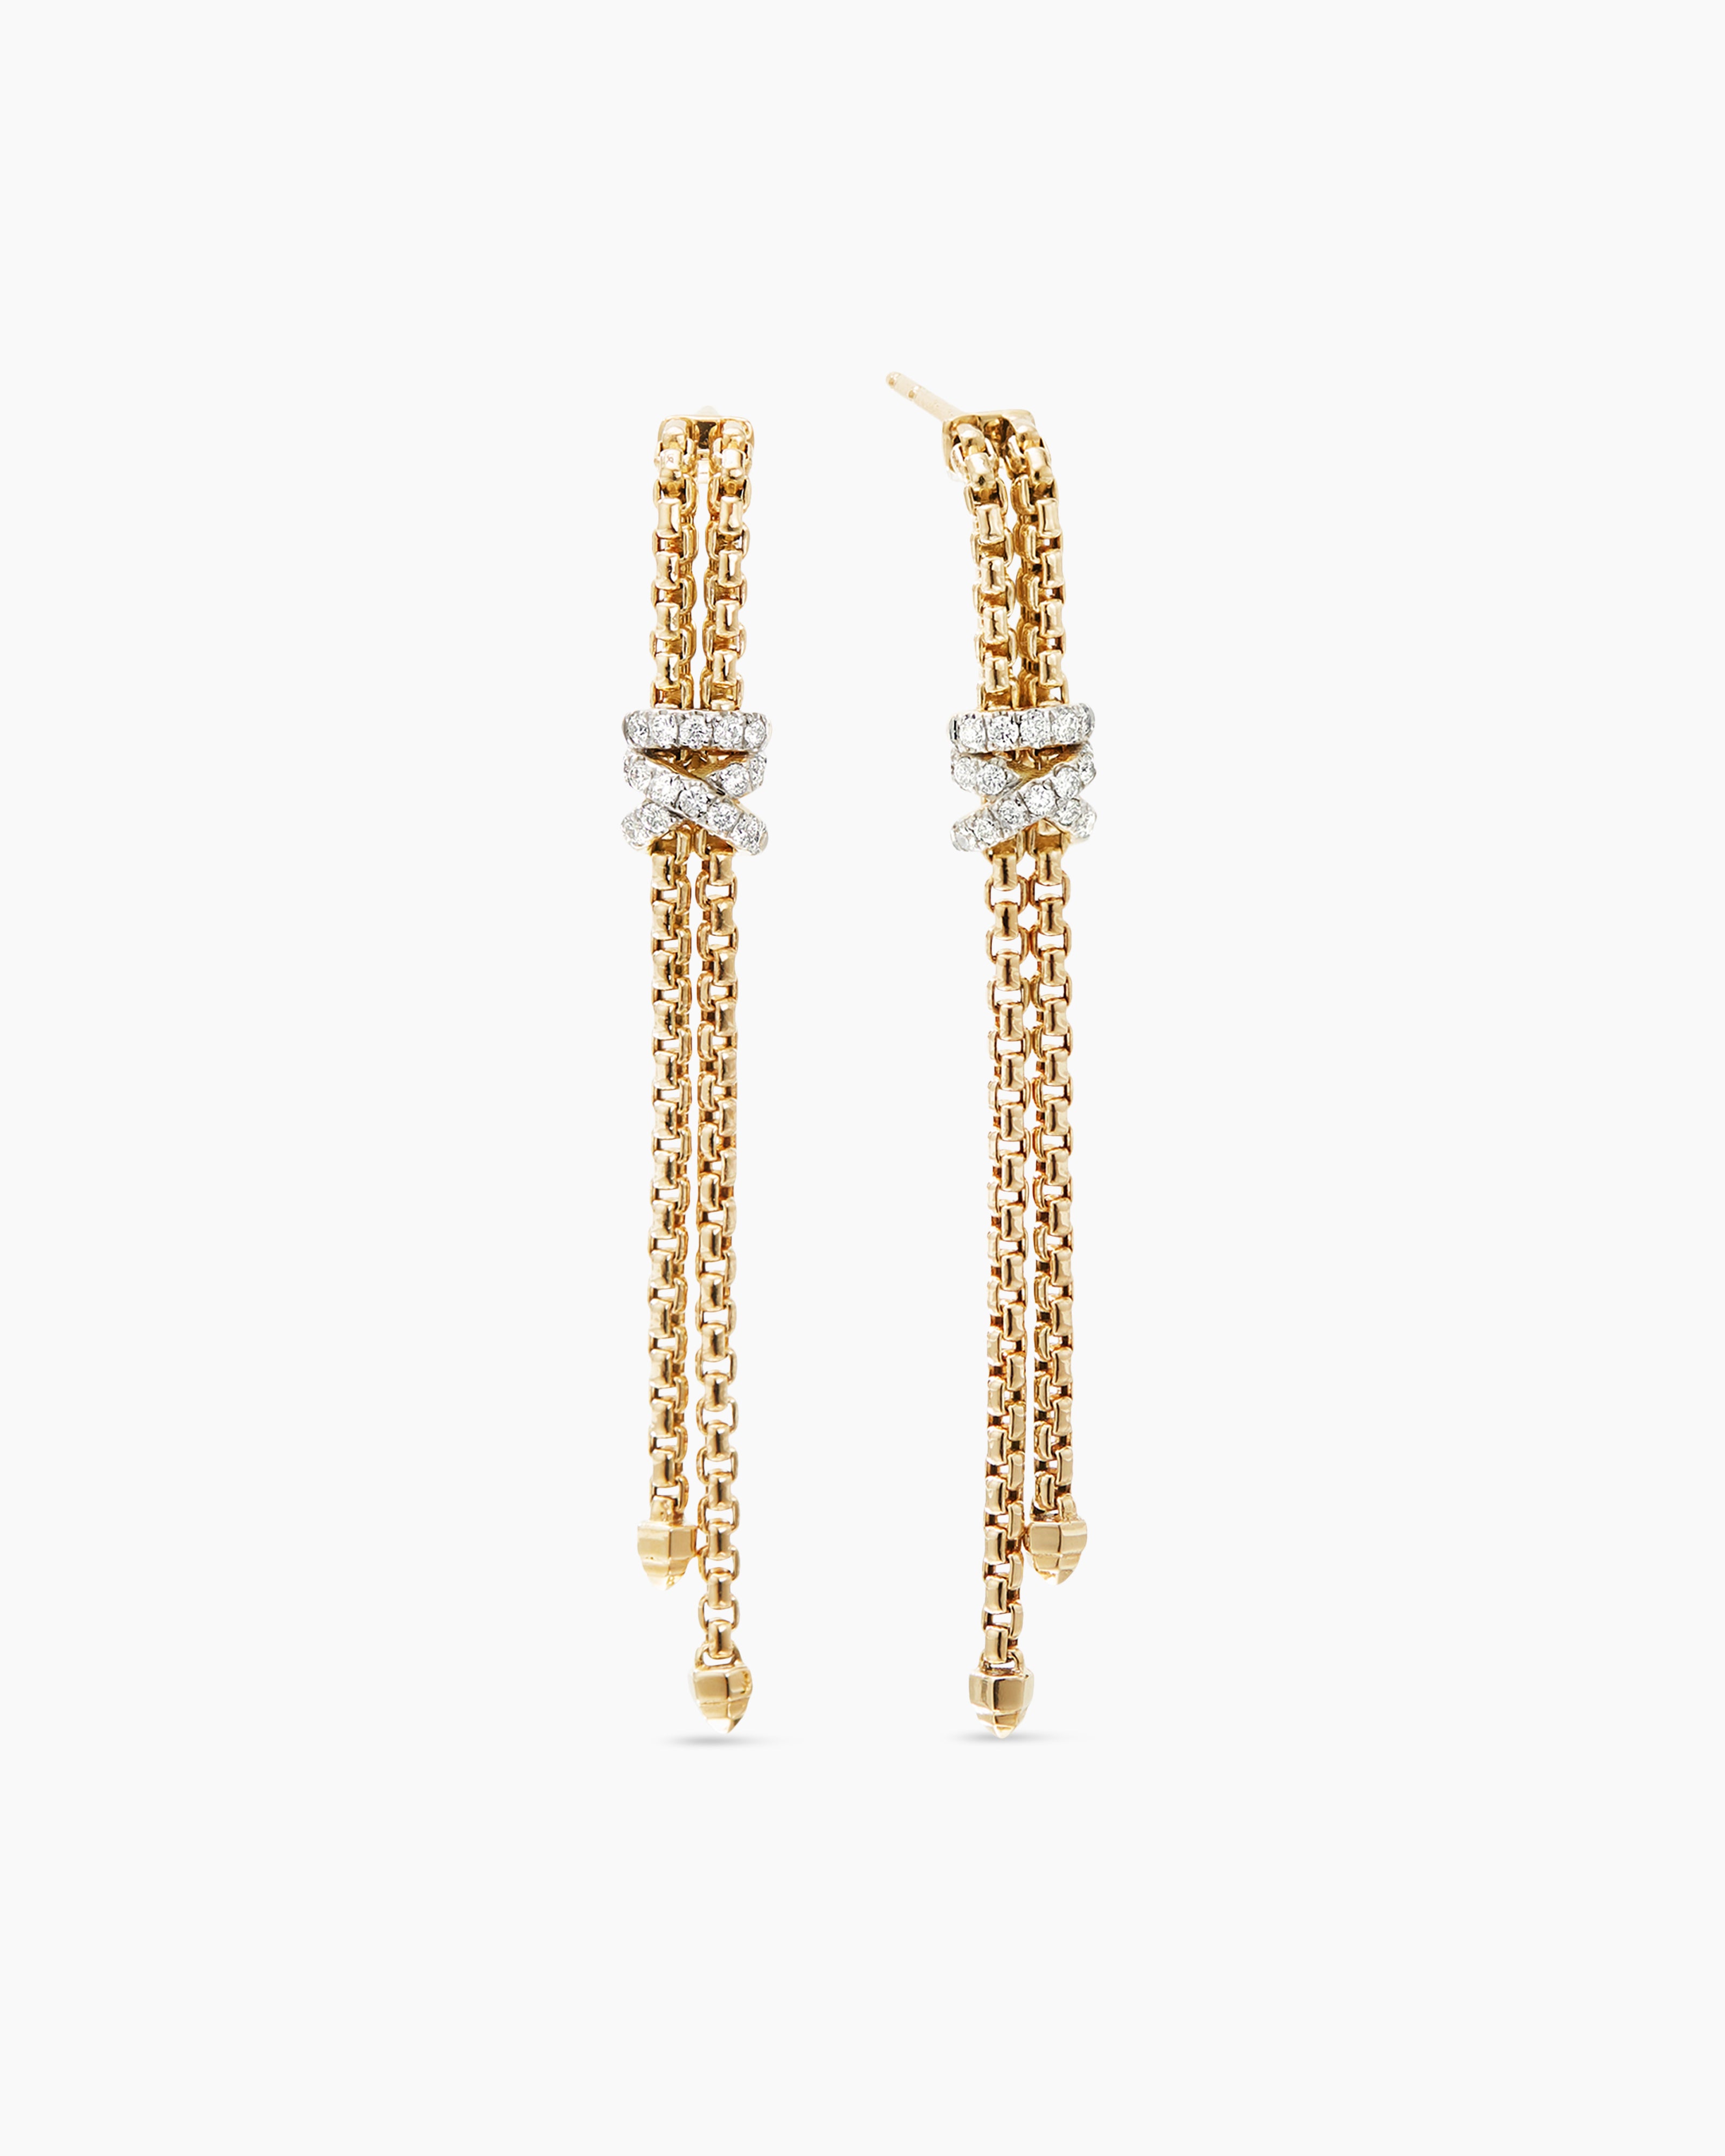 ERG145 - One Gram Gold Plated Long Chain Hanging Earrings Online Shopping  in India - Buy Original Chidambaram Covering product at Wholesale Price.  Online shopping for guarantee South Indian Gold Plated Jewellery.